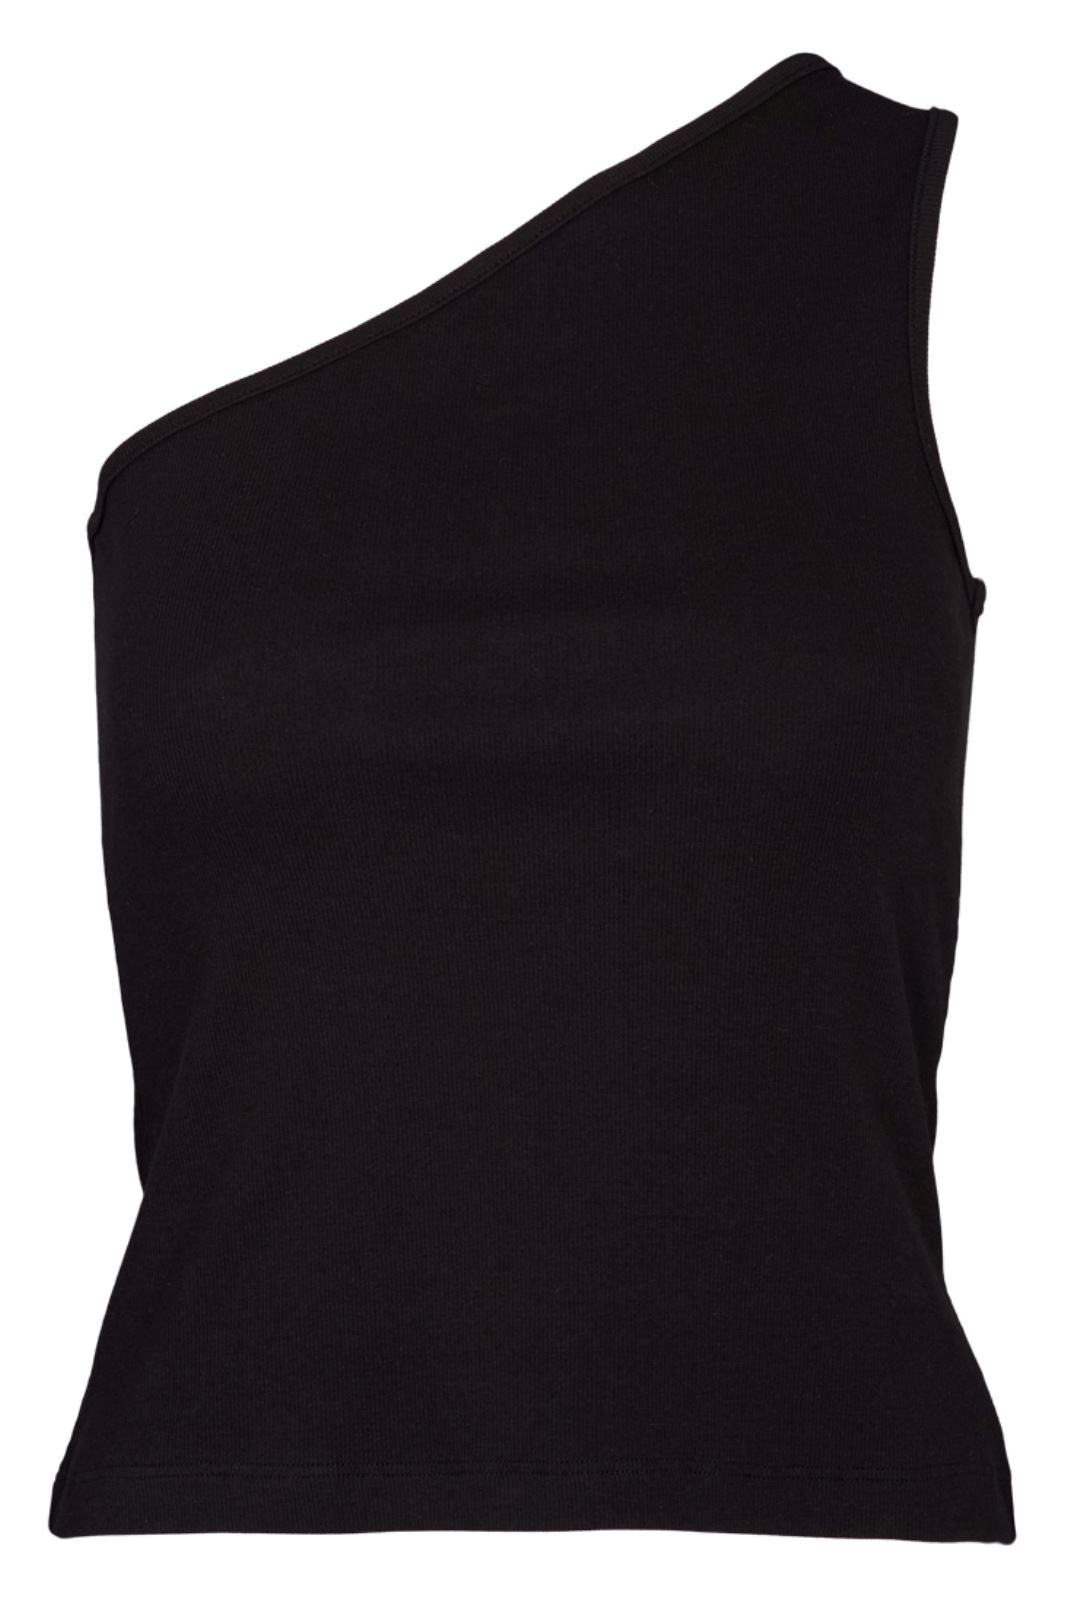 Basic Apparel - Ludmilla One Shoulder Top - 001 Black Toppe 